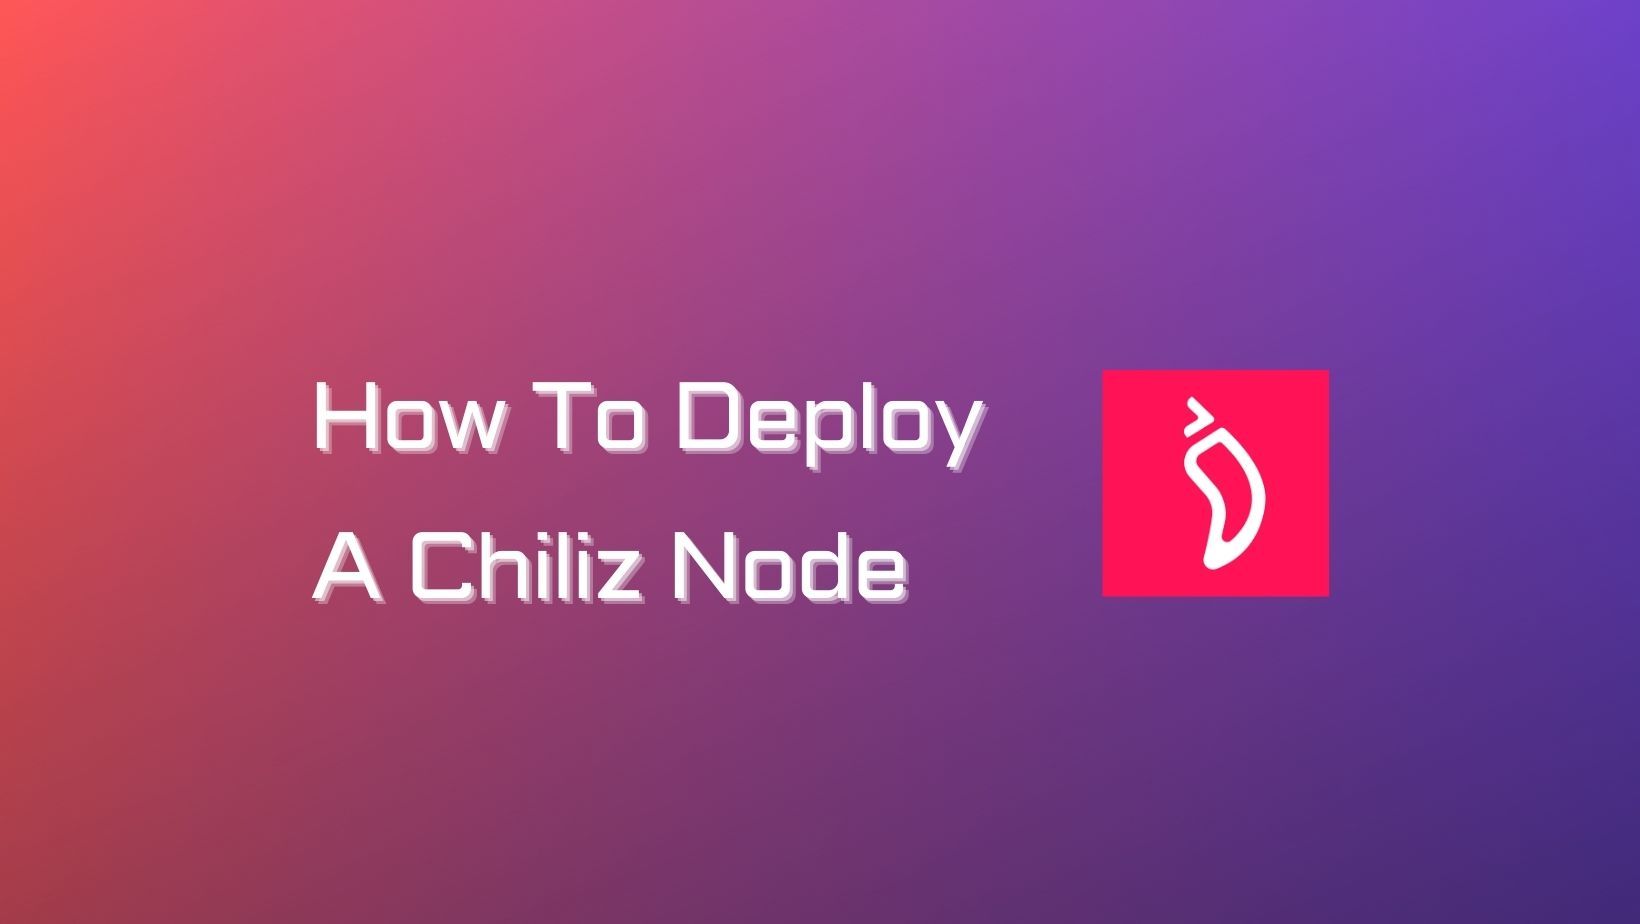 How To Deploy A Chiliz Node